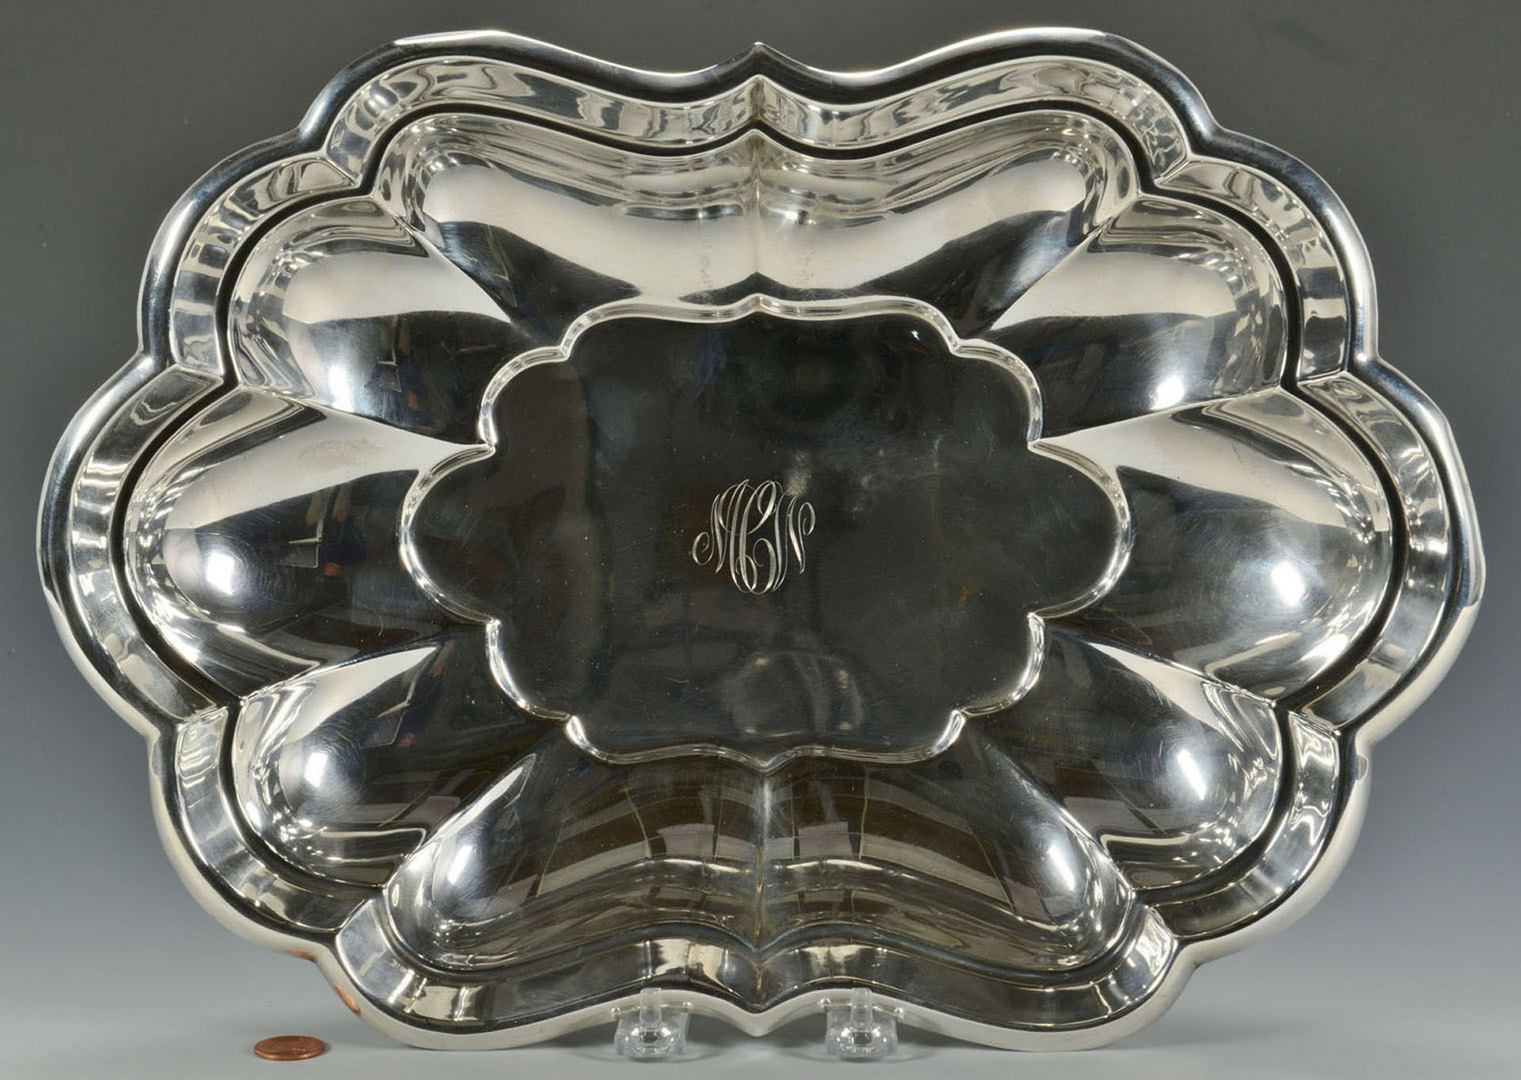 Lot 308: Reed & Barton silver oval fruit bowl